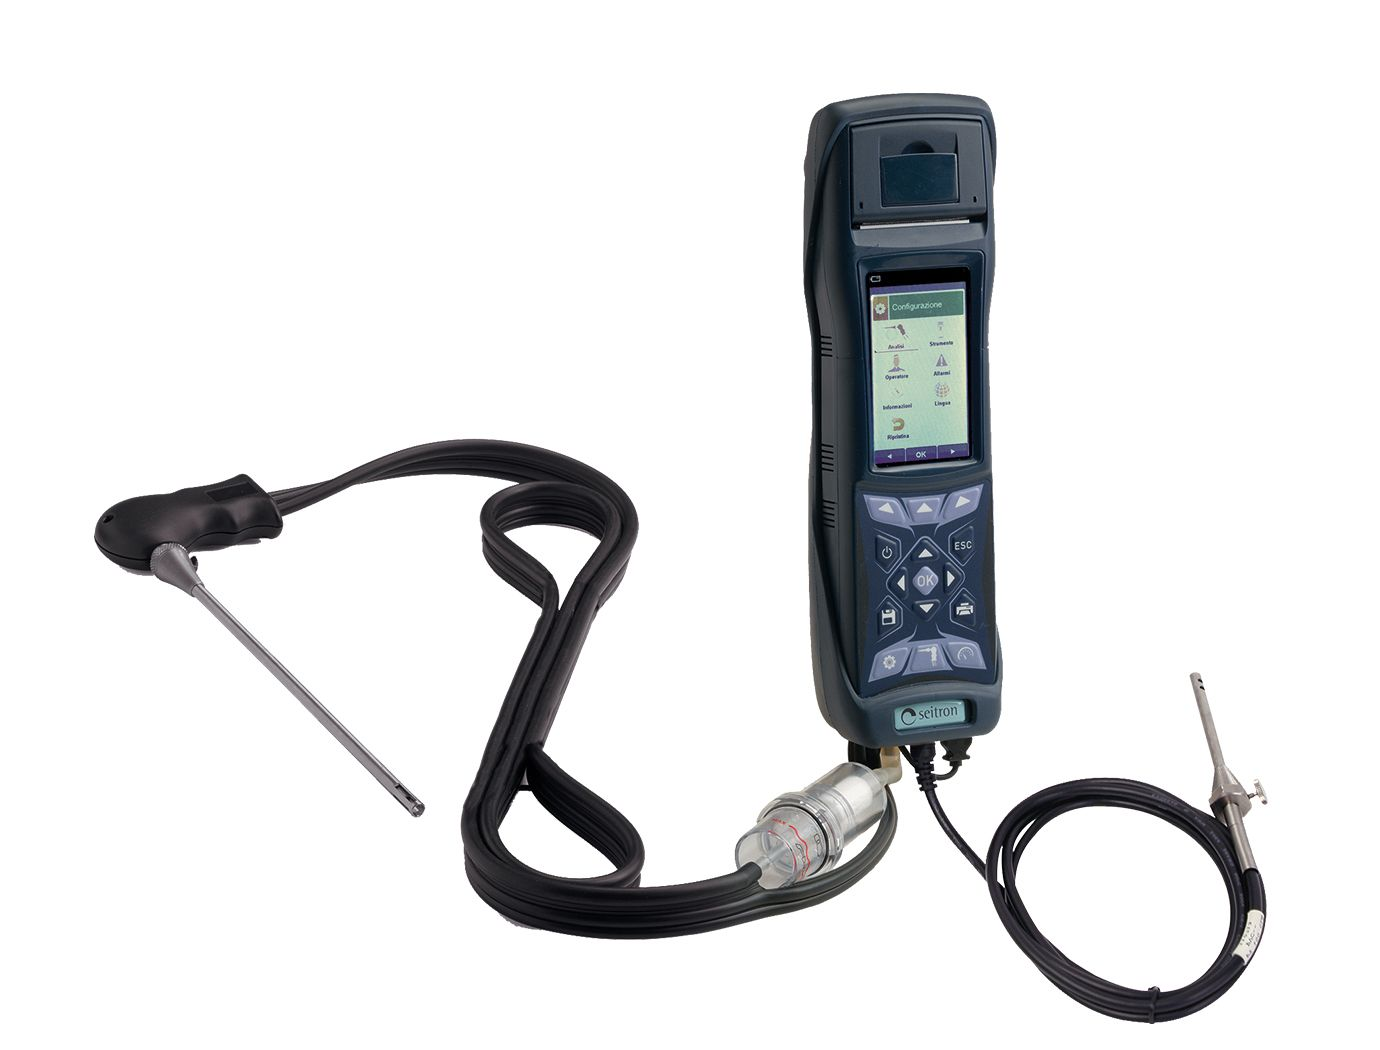 S6000 with probes